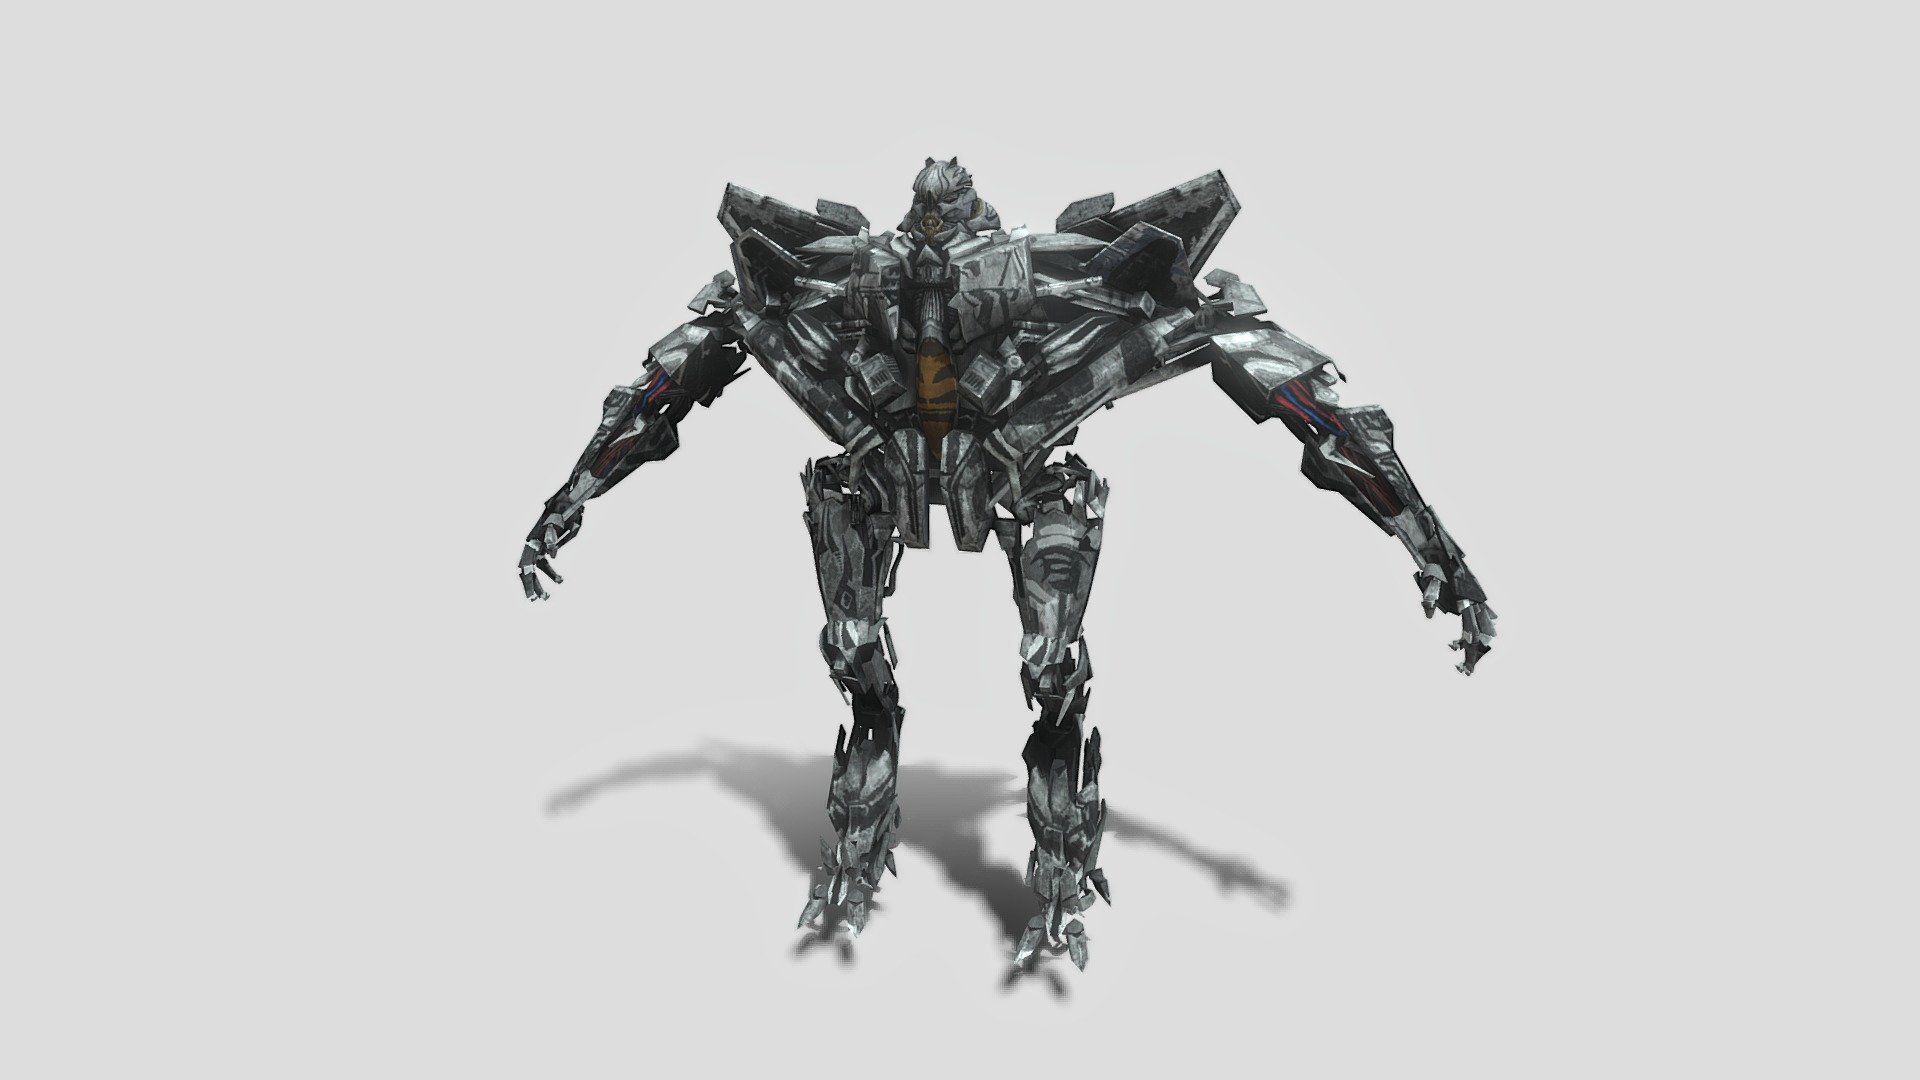 The Starscream 3d model done in blender! 
The best part is , it is rigged 

Hope you like it - Starscream - Download Free 3D model by Jit Debnath (@jitdebnath2442) 3d model